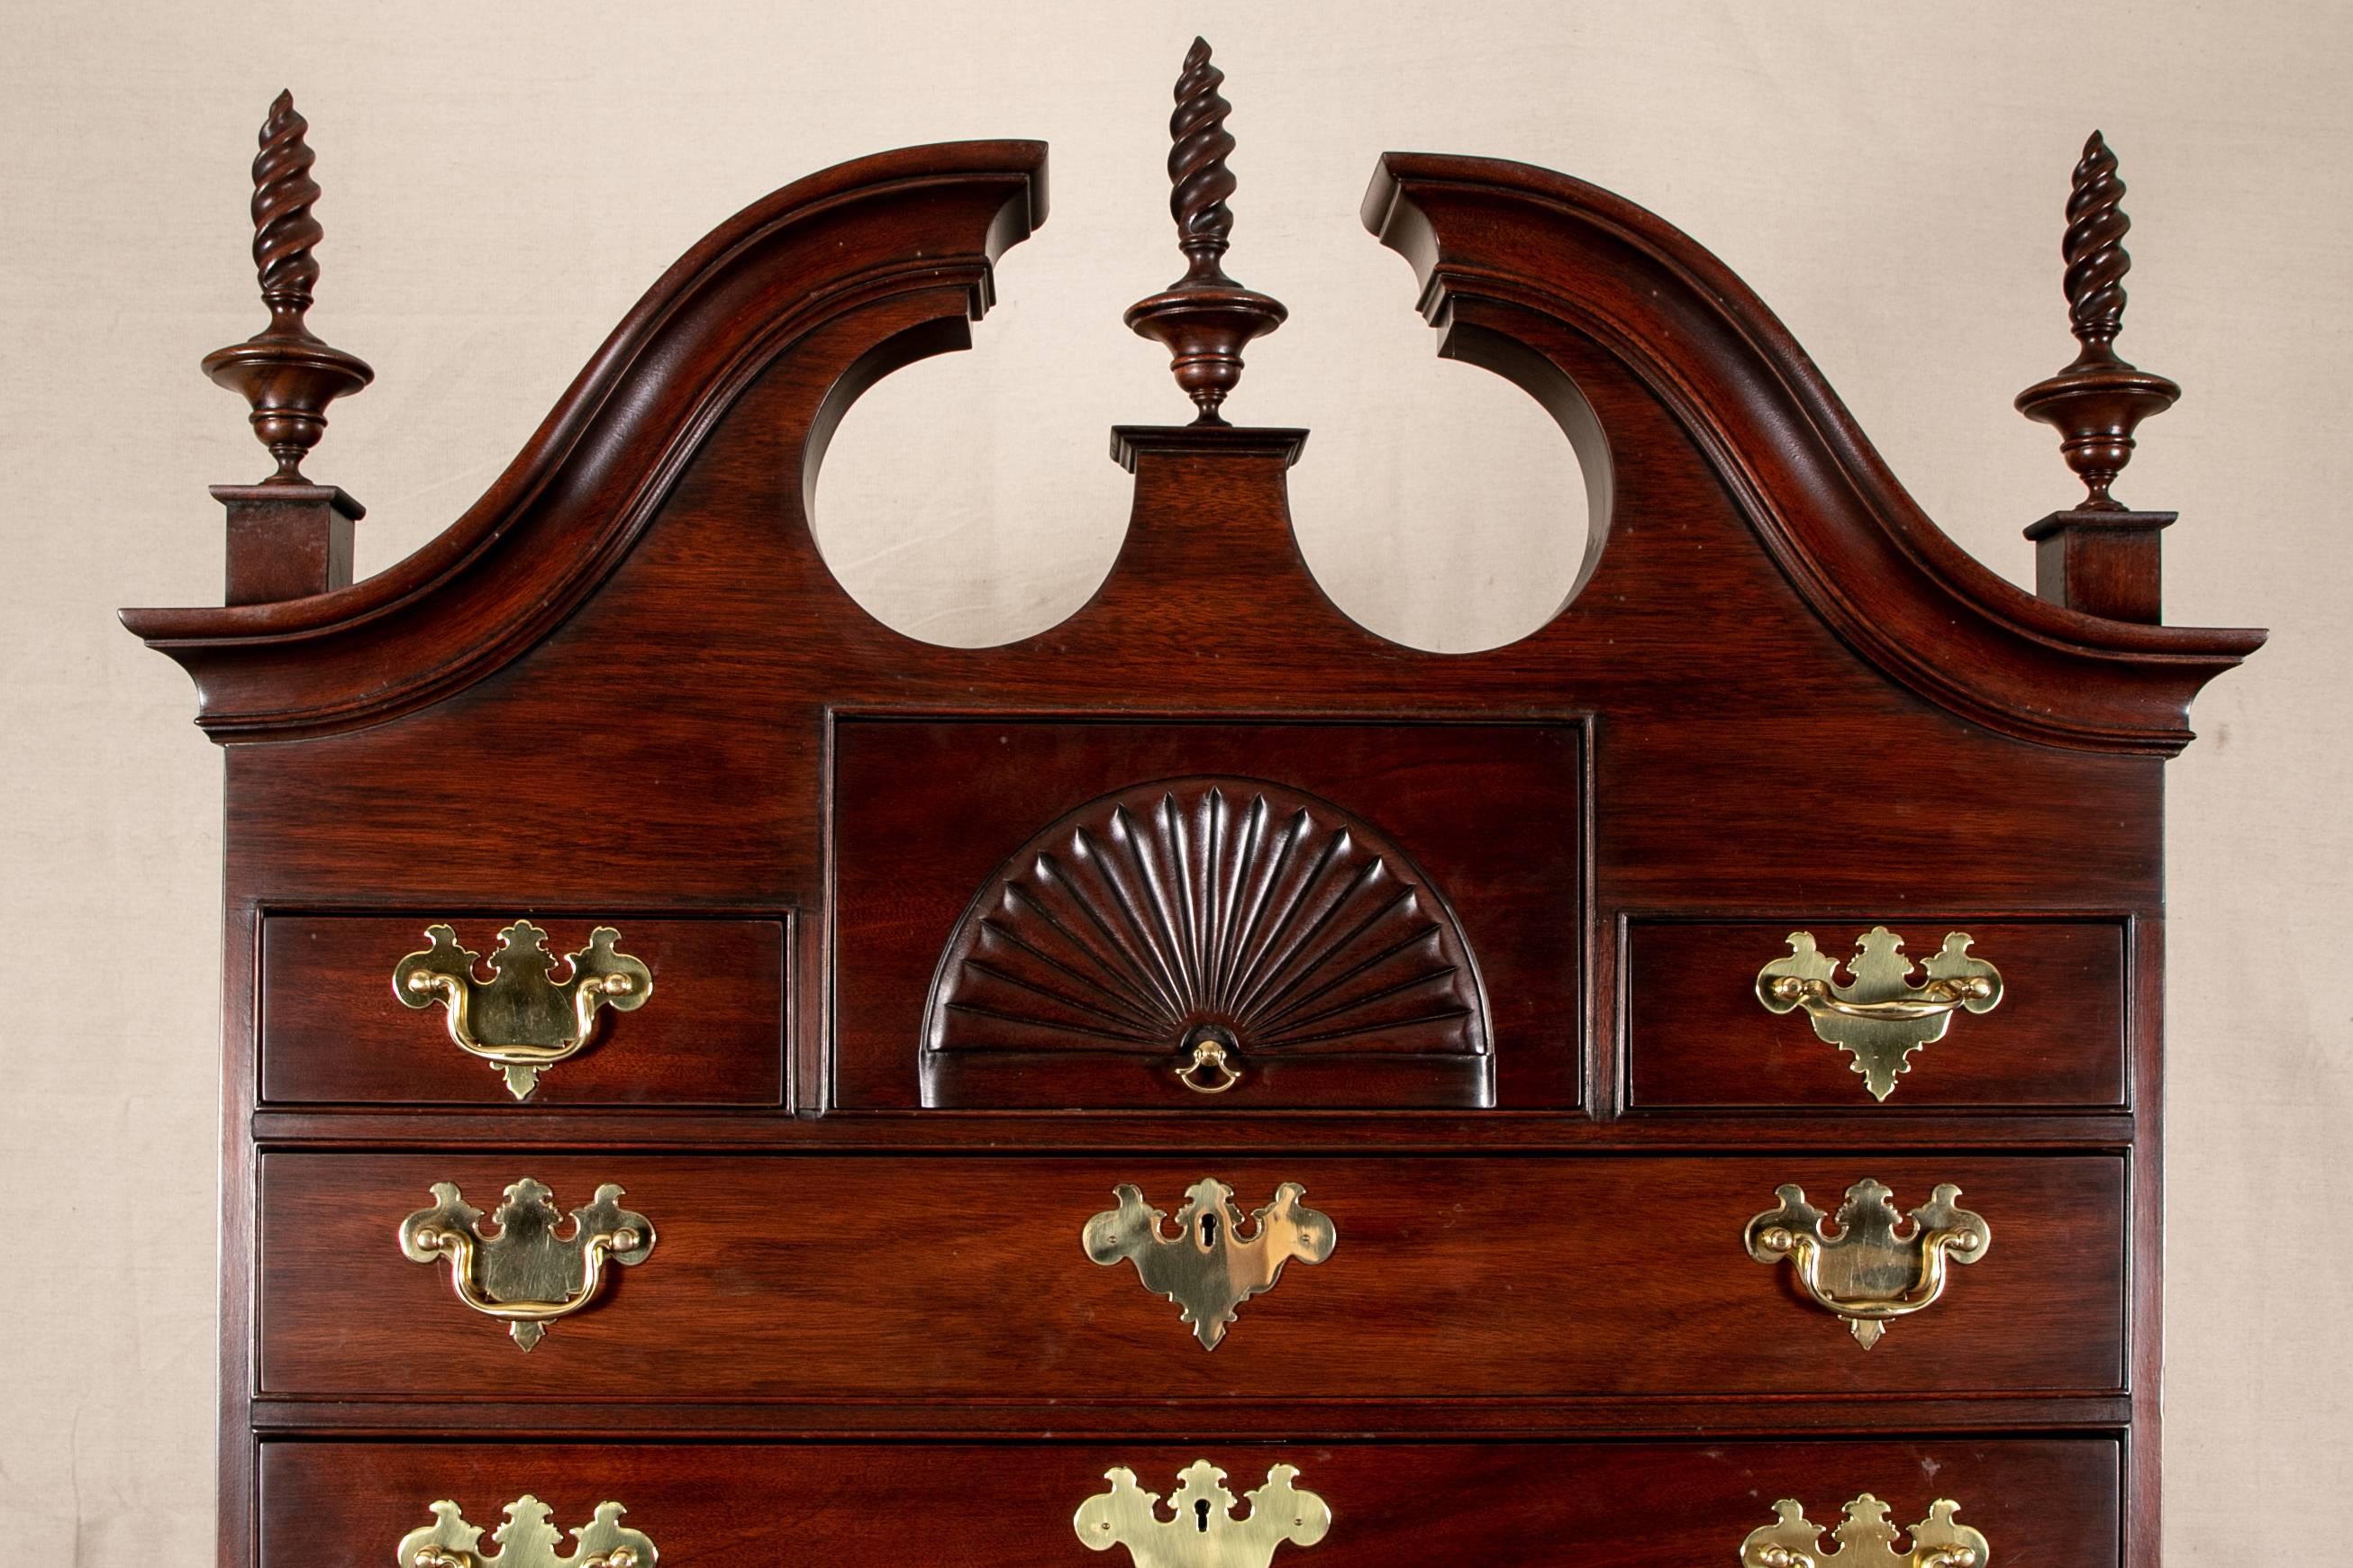 Henkel-Harris Dale high chest, authorized 18th century reproduction by the society for the Preservation of New England Antiquities, mahogany, top portion with broken bonnet top with three barley twist finials flanking each end and in centre, row of